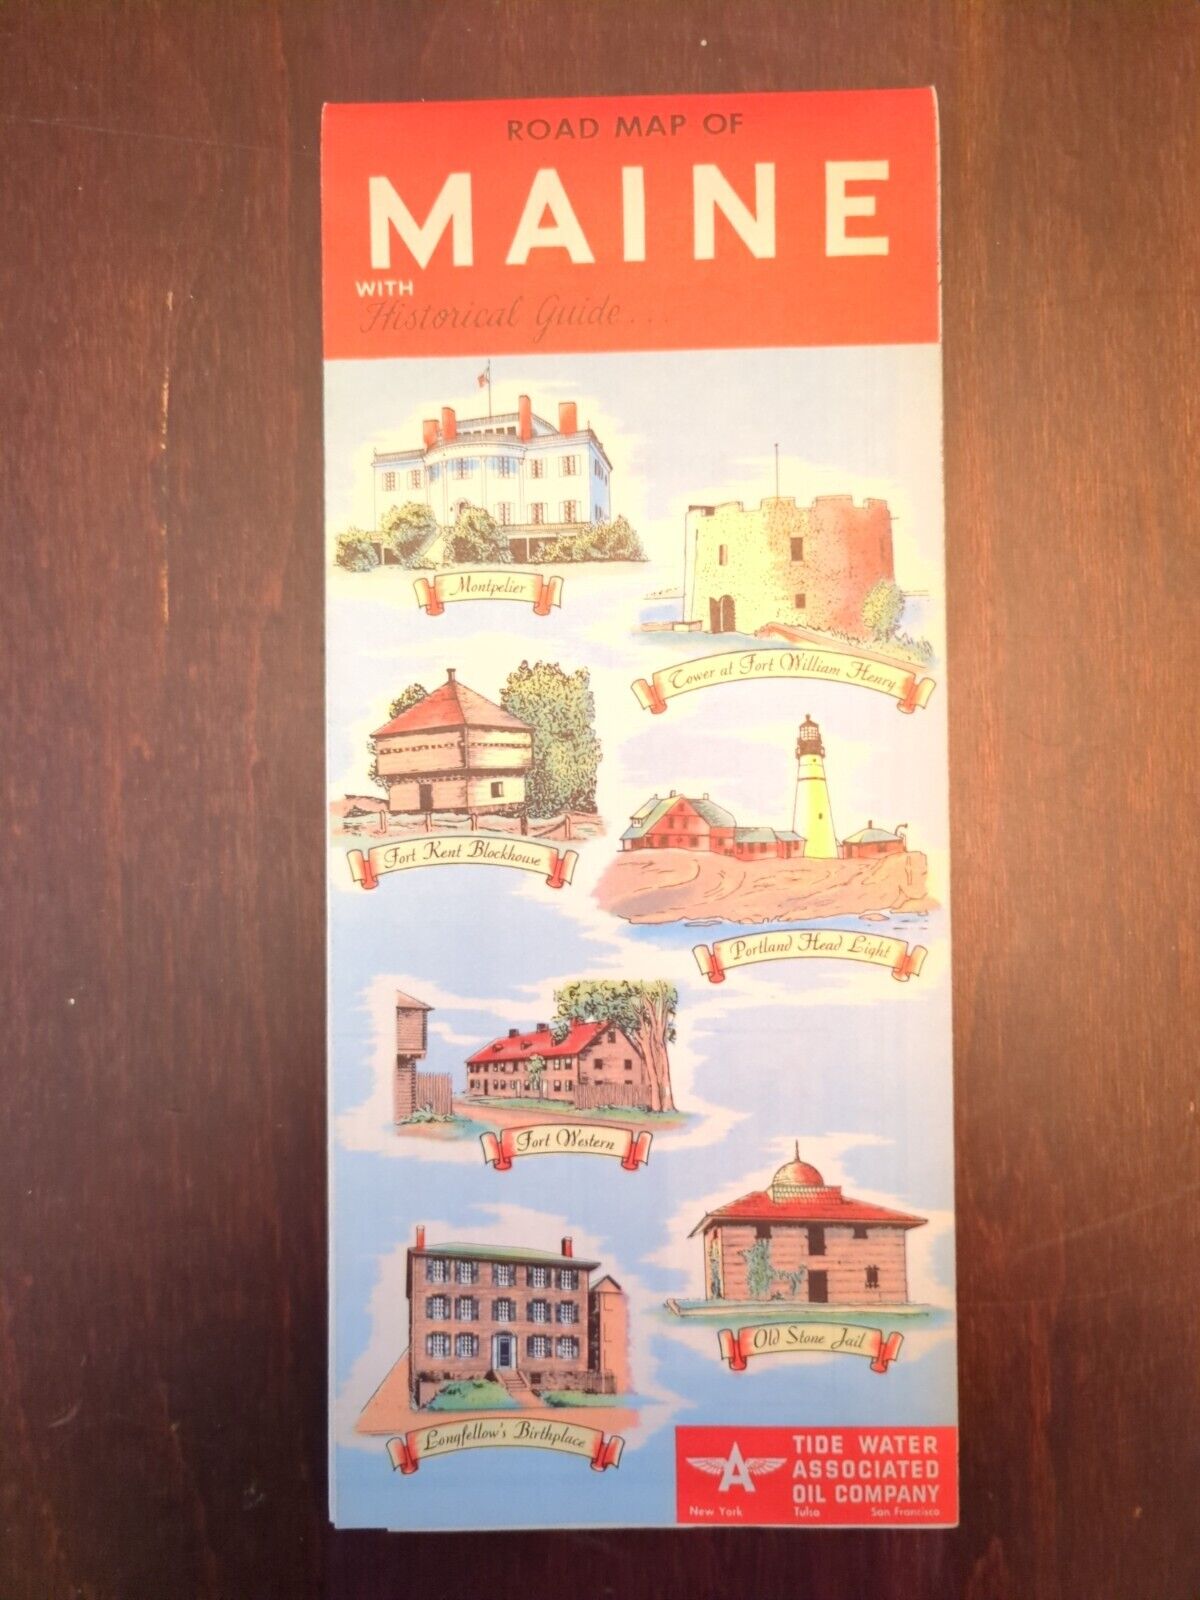 Maine Road Map Courtesy of Tide Water Associated Oil Co.  1952 Edition